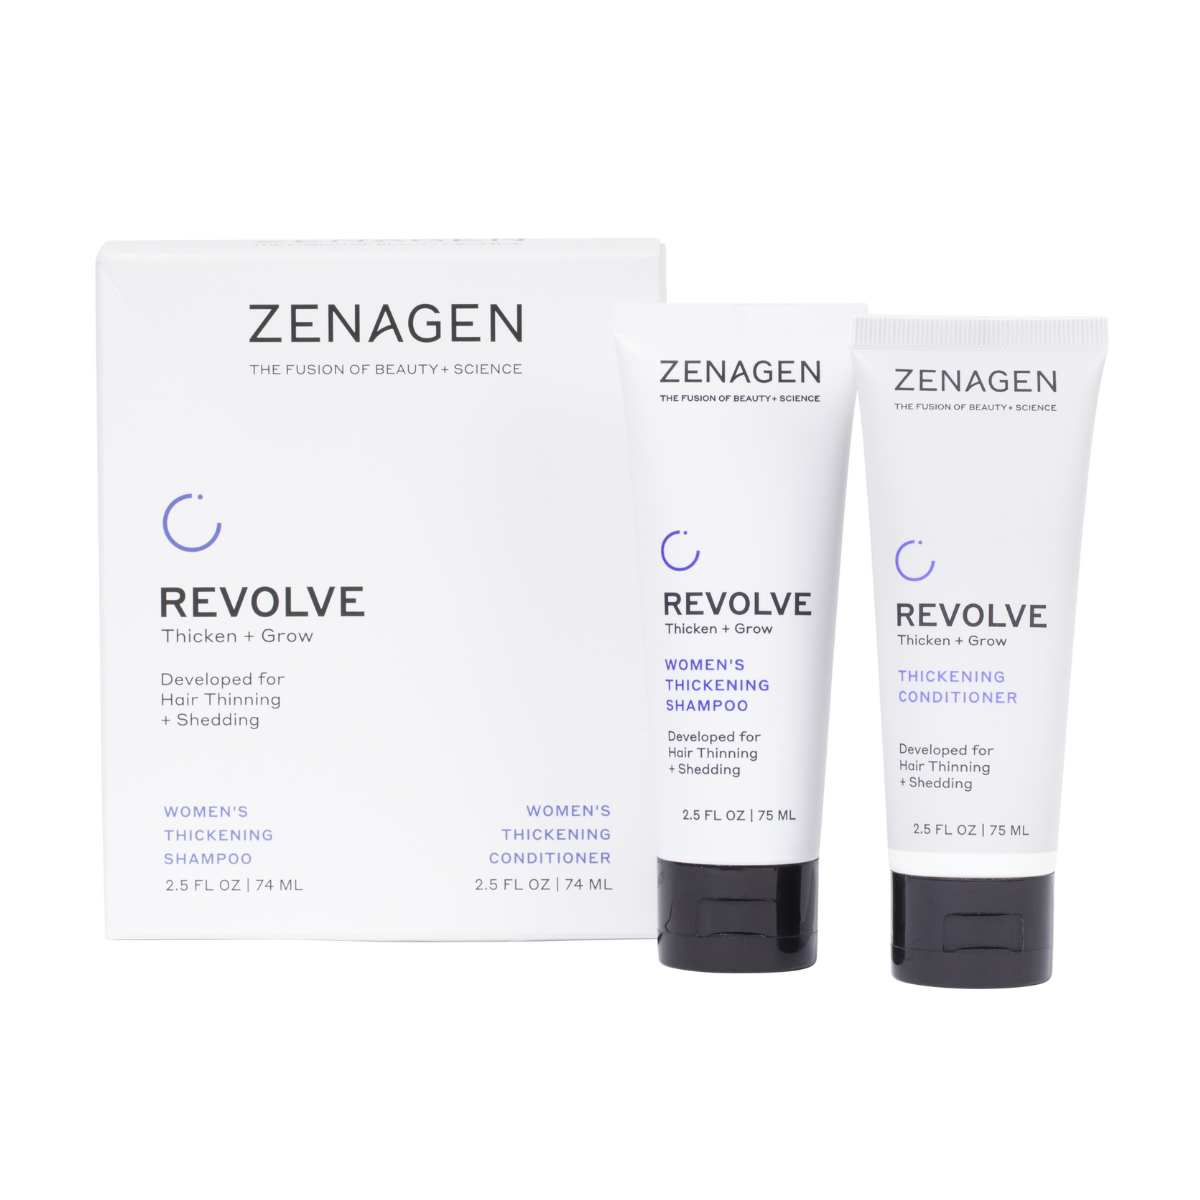 Zenagen Revolve Women's Thickening Shampoo and Conditioner Travel Kit For Thinning Hair Shop At Exclusive Beauty